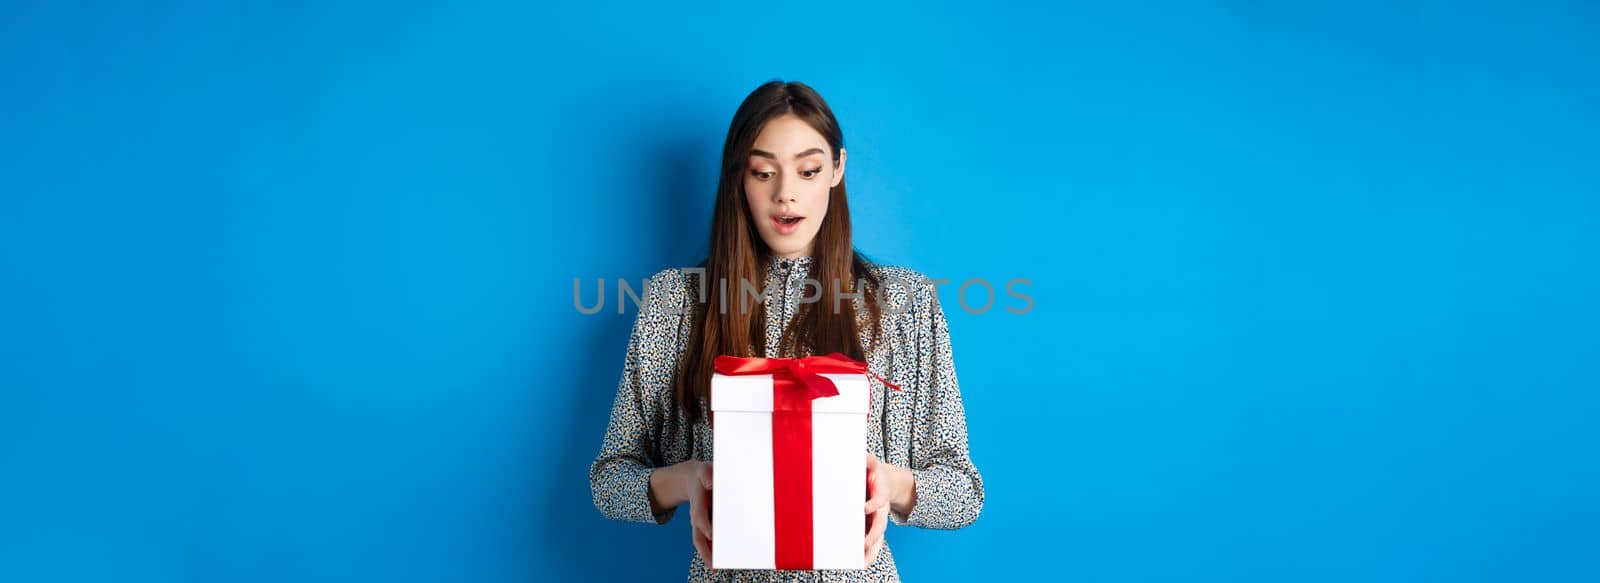 Holidays. Surprised young woman looking at gift with amazed face, receive Valentines day present, standing in dress on blue background.